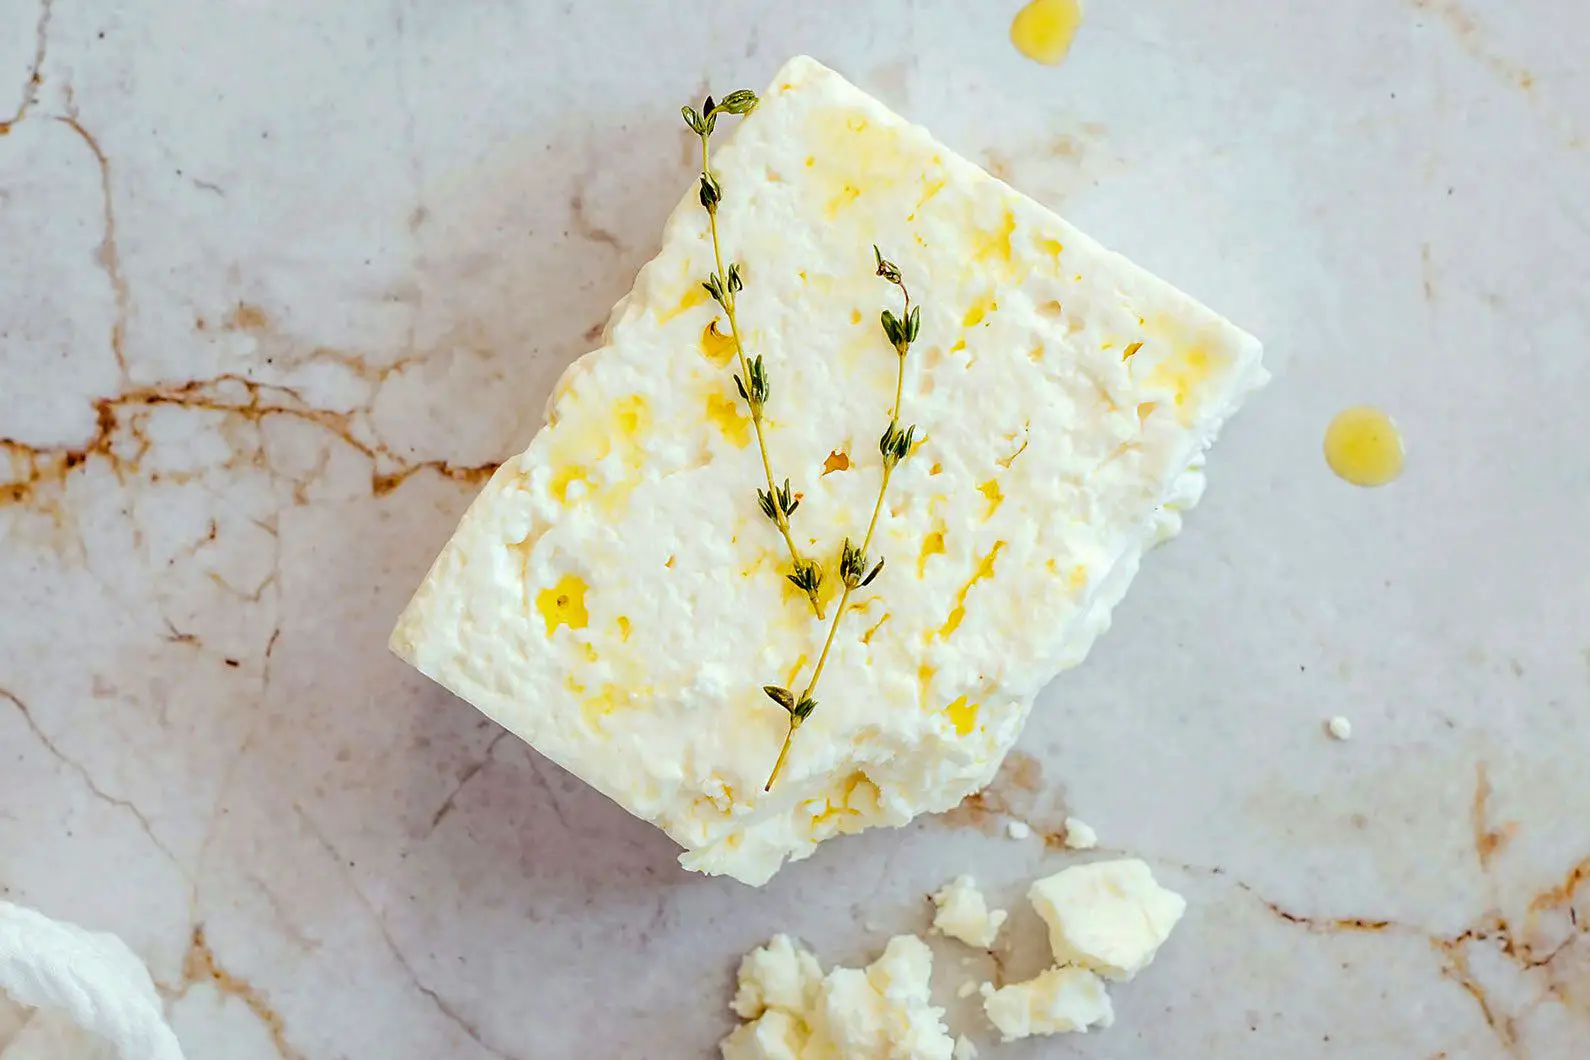 Feta cheese: ¿What is it and what are its substitutes?